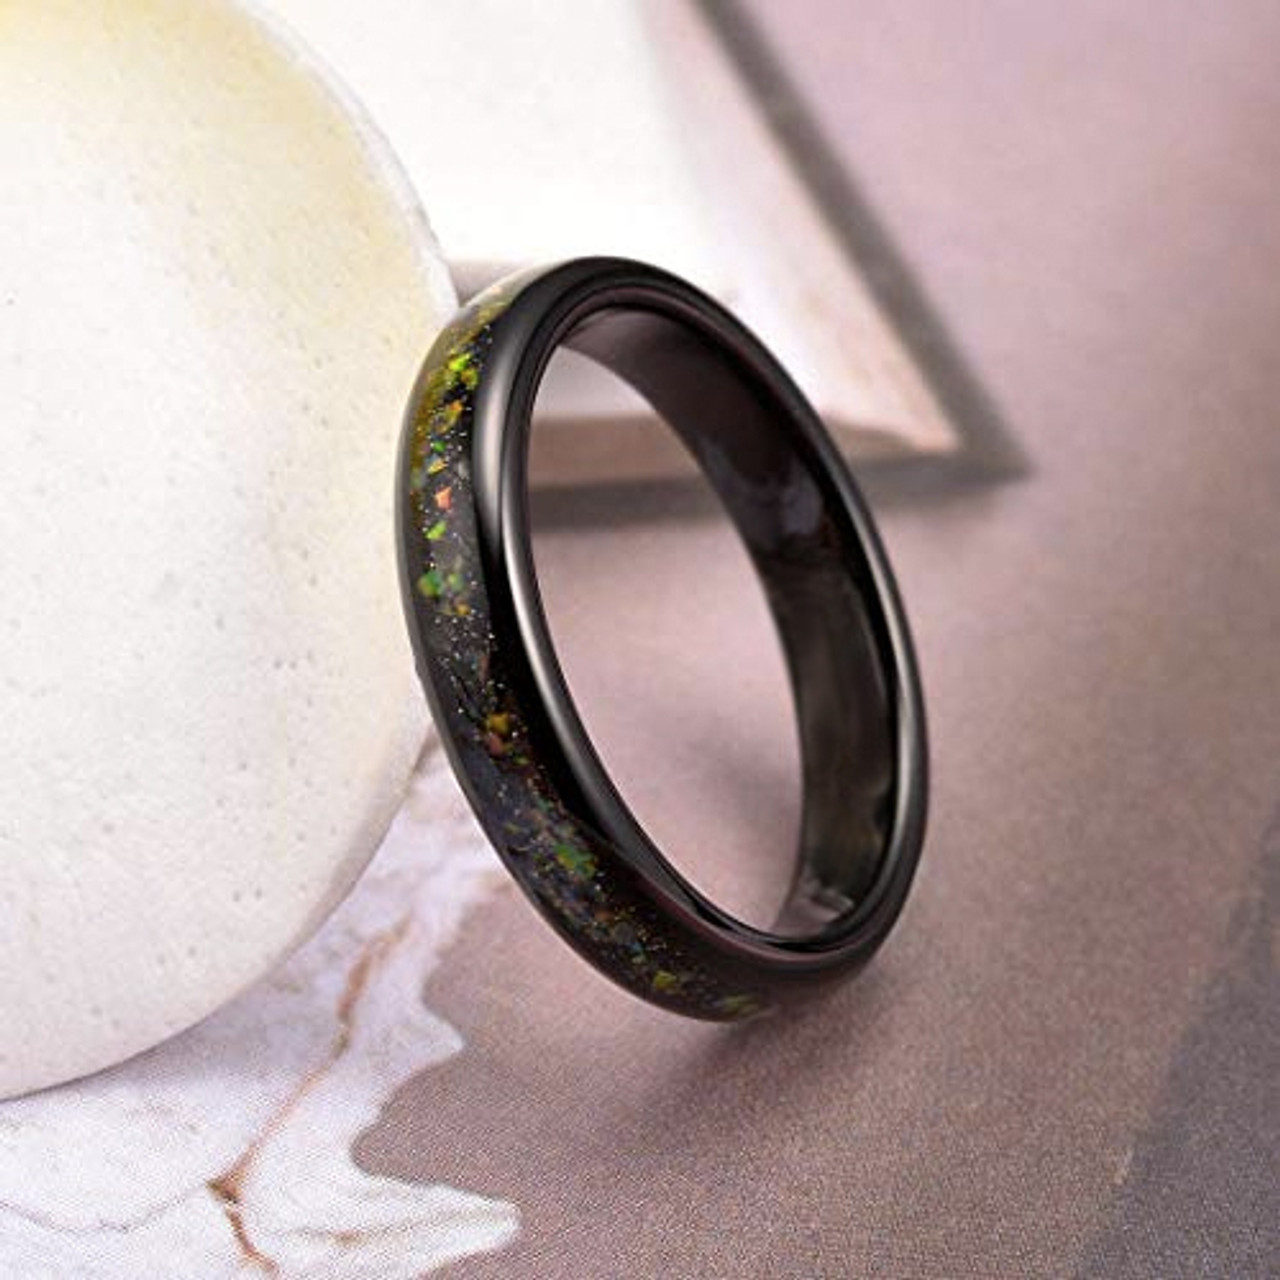 (5mm) Unisex or Women's Tungsten Carbide Wedding Ring Bands. Black Band and Multiple Color Rainbow Opal Inlay with Organic Tones.